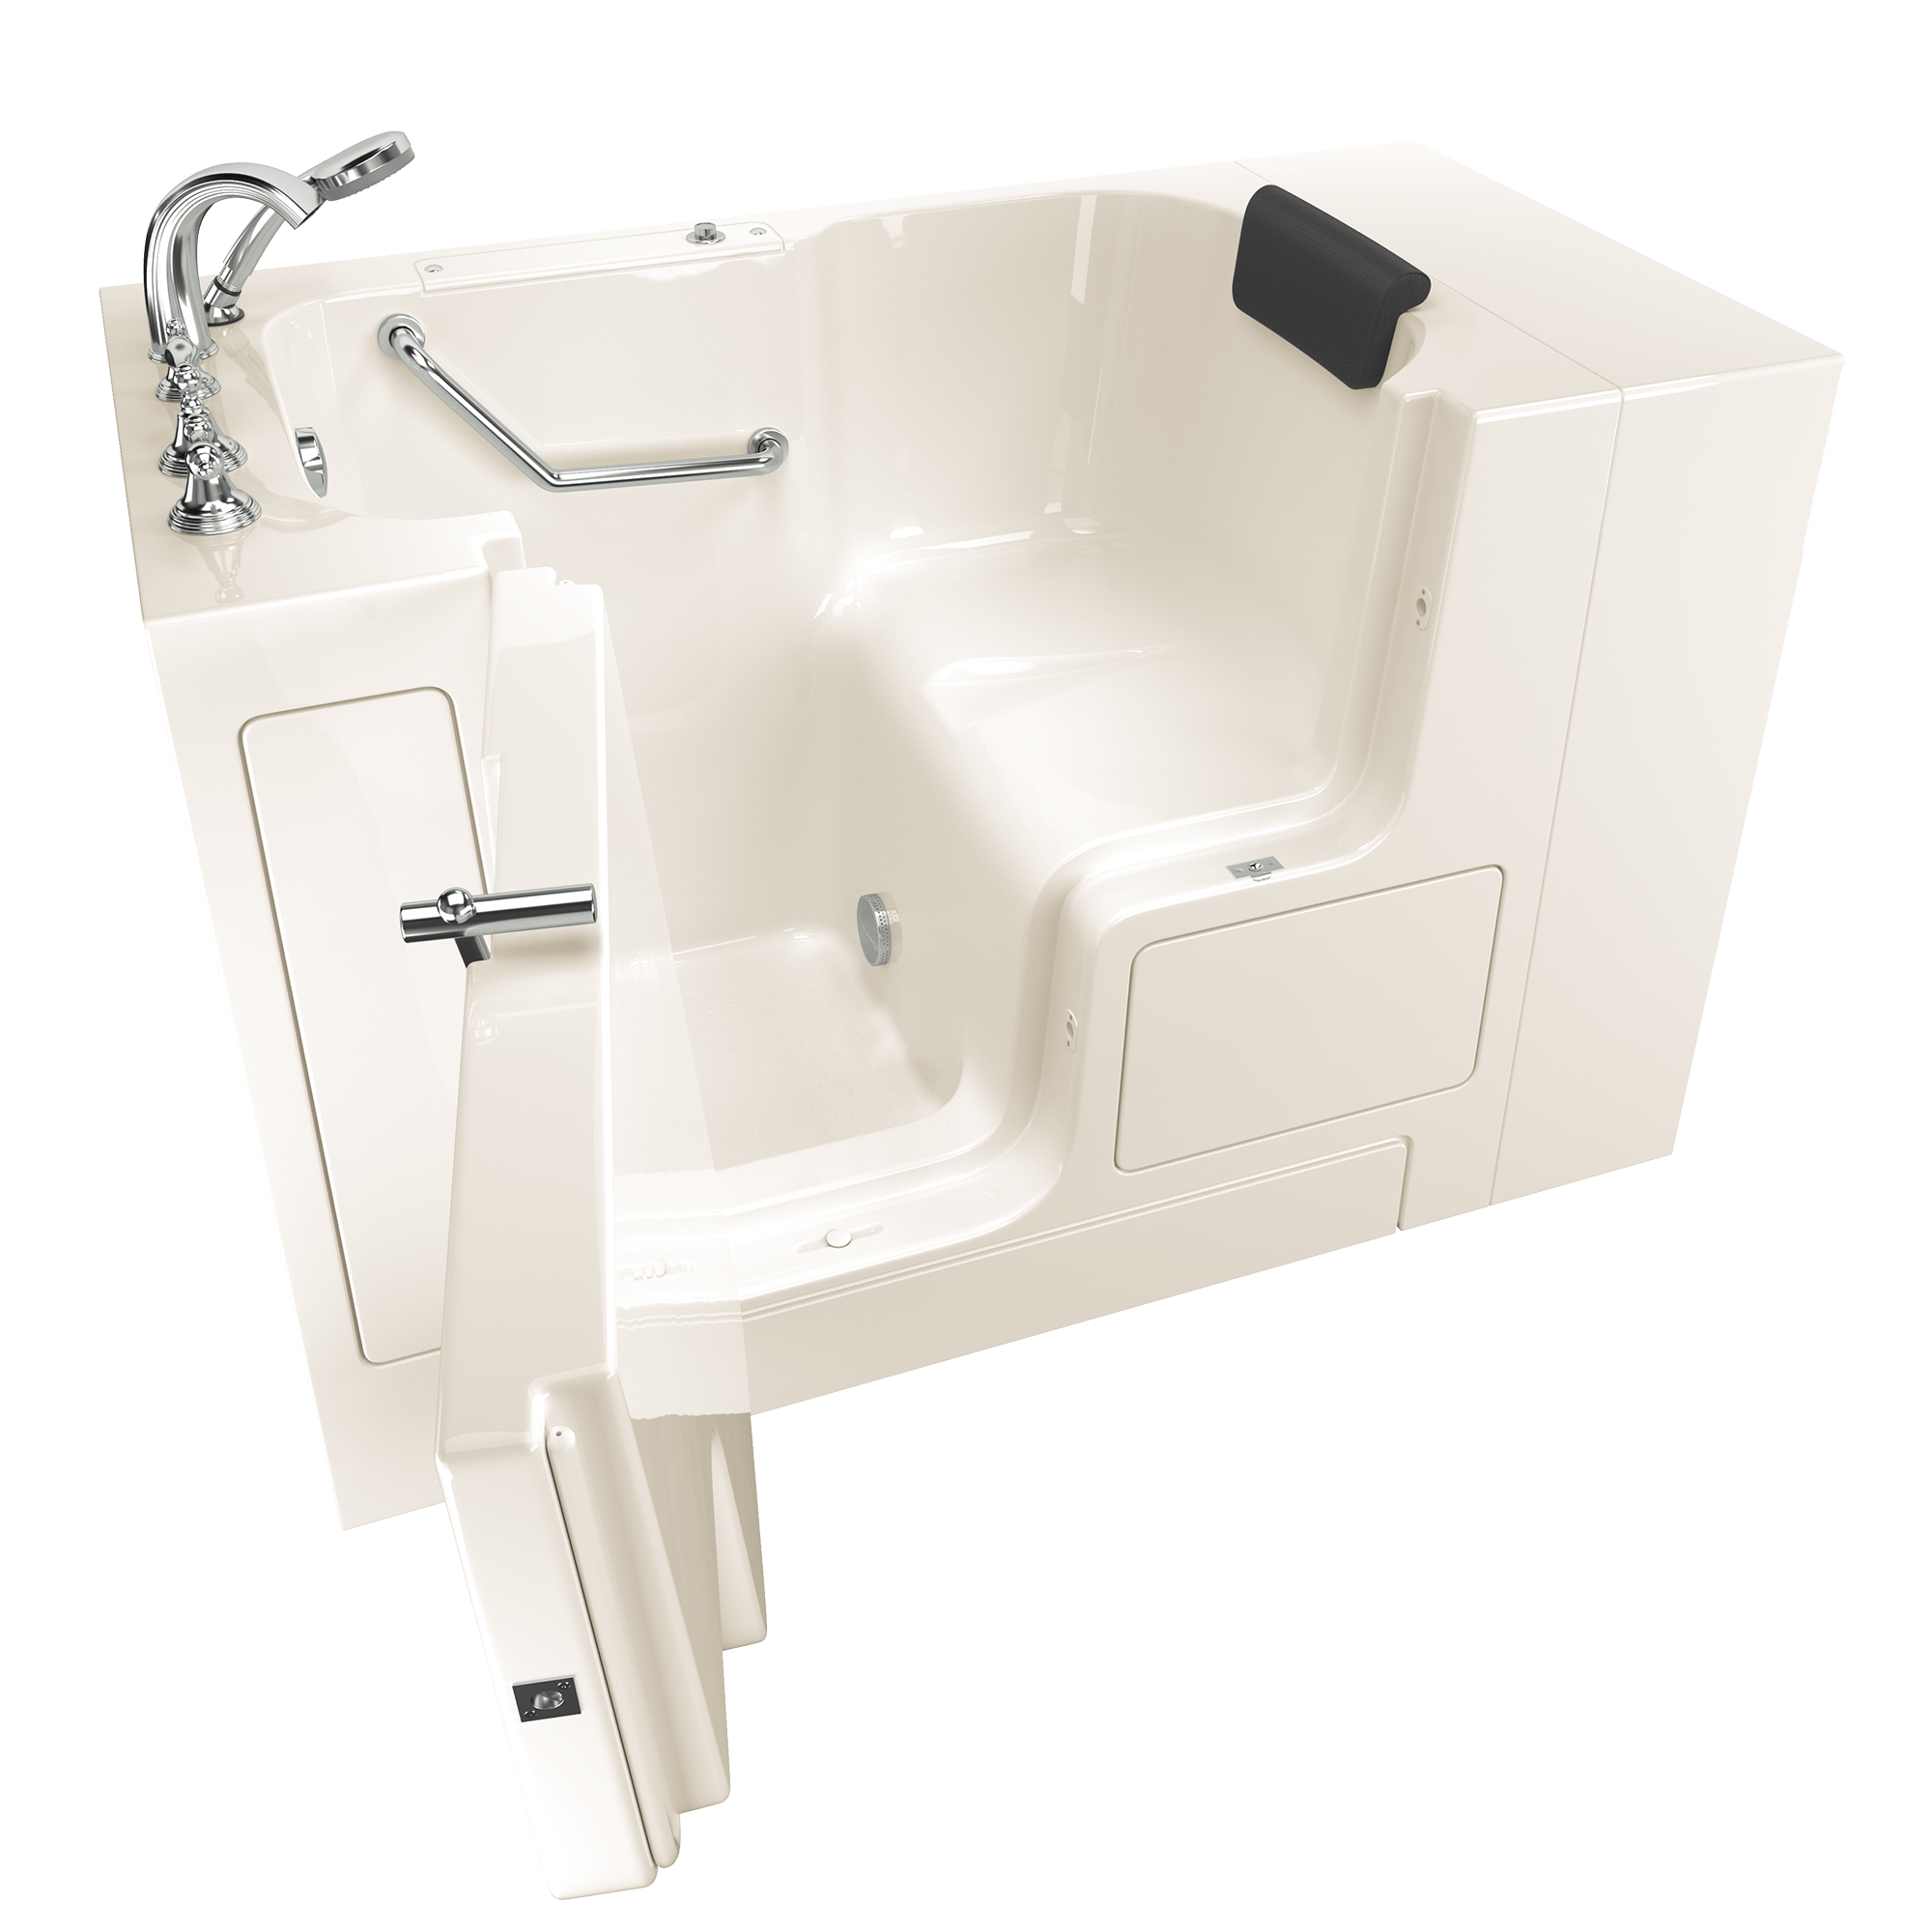 Gelcoat Premium Series 32 x 52  Inch Walk in Tub With Soaker System   Left Hand Drain With Faucet WIB LINEN